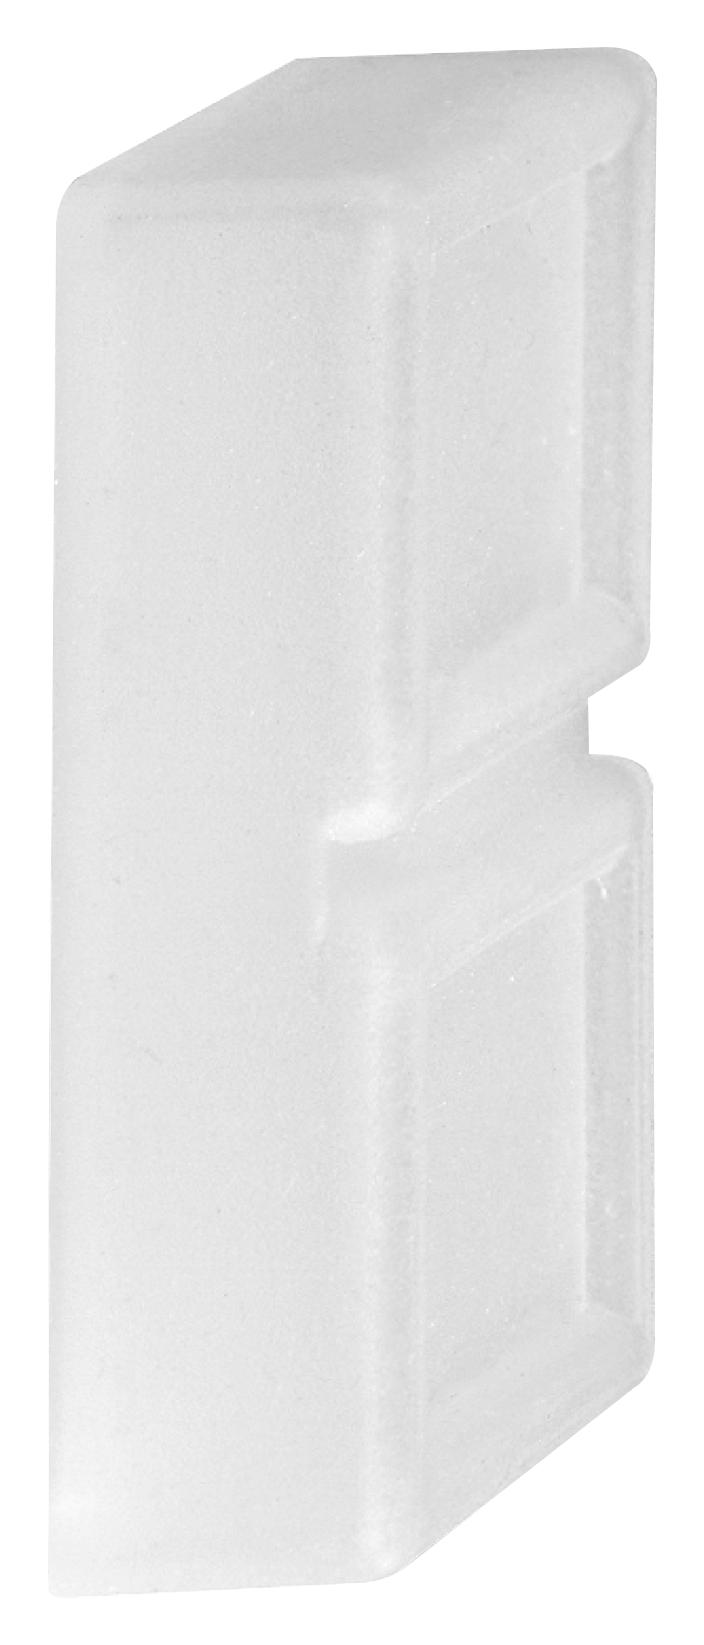 SCHNEIDER ELECTRIC Sealing Boots ZBW008A CLEAR BOOT, DOUBLE HEADED PUSH-BUTTON SCHNEIDER ELECTRIC 3109153 ZBW008A